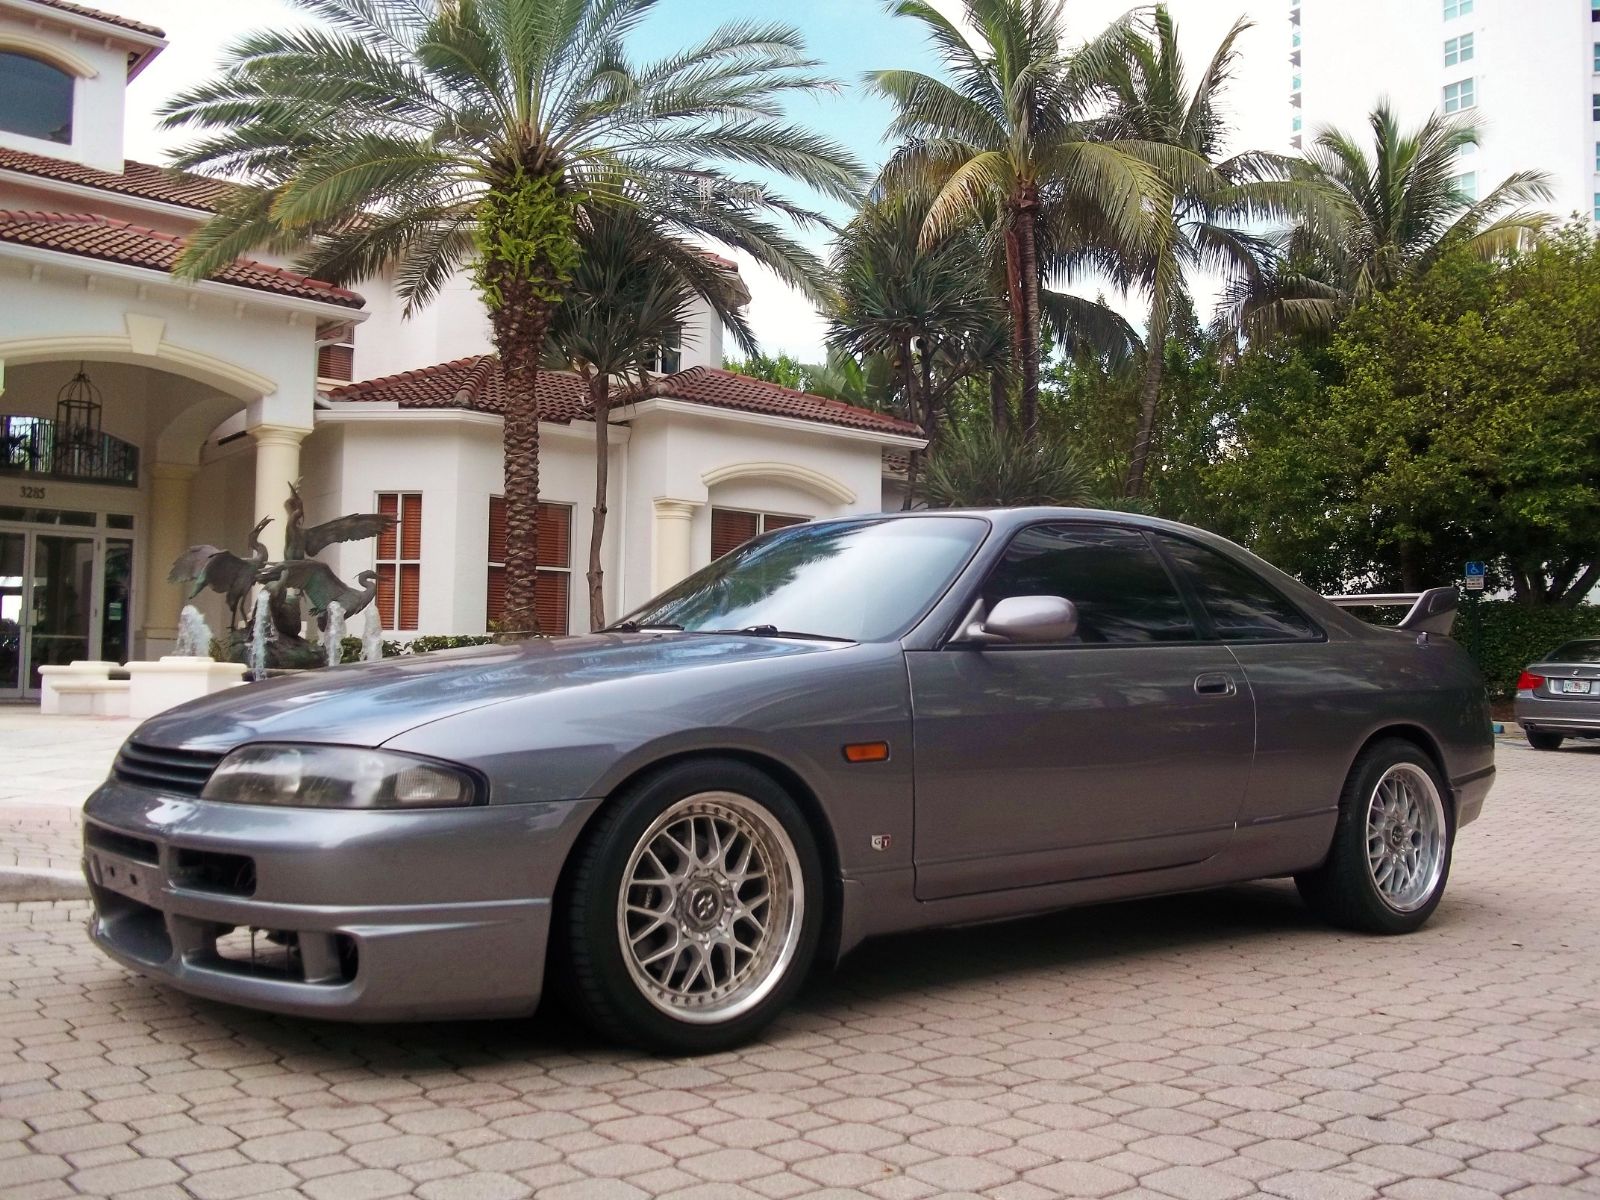 Nissan r33 for sale in florida #4